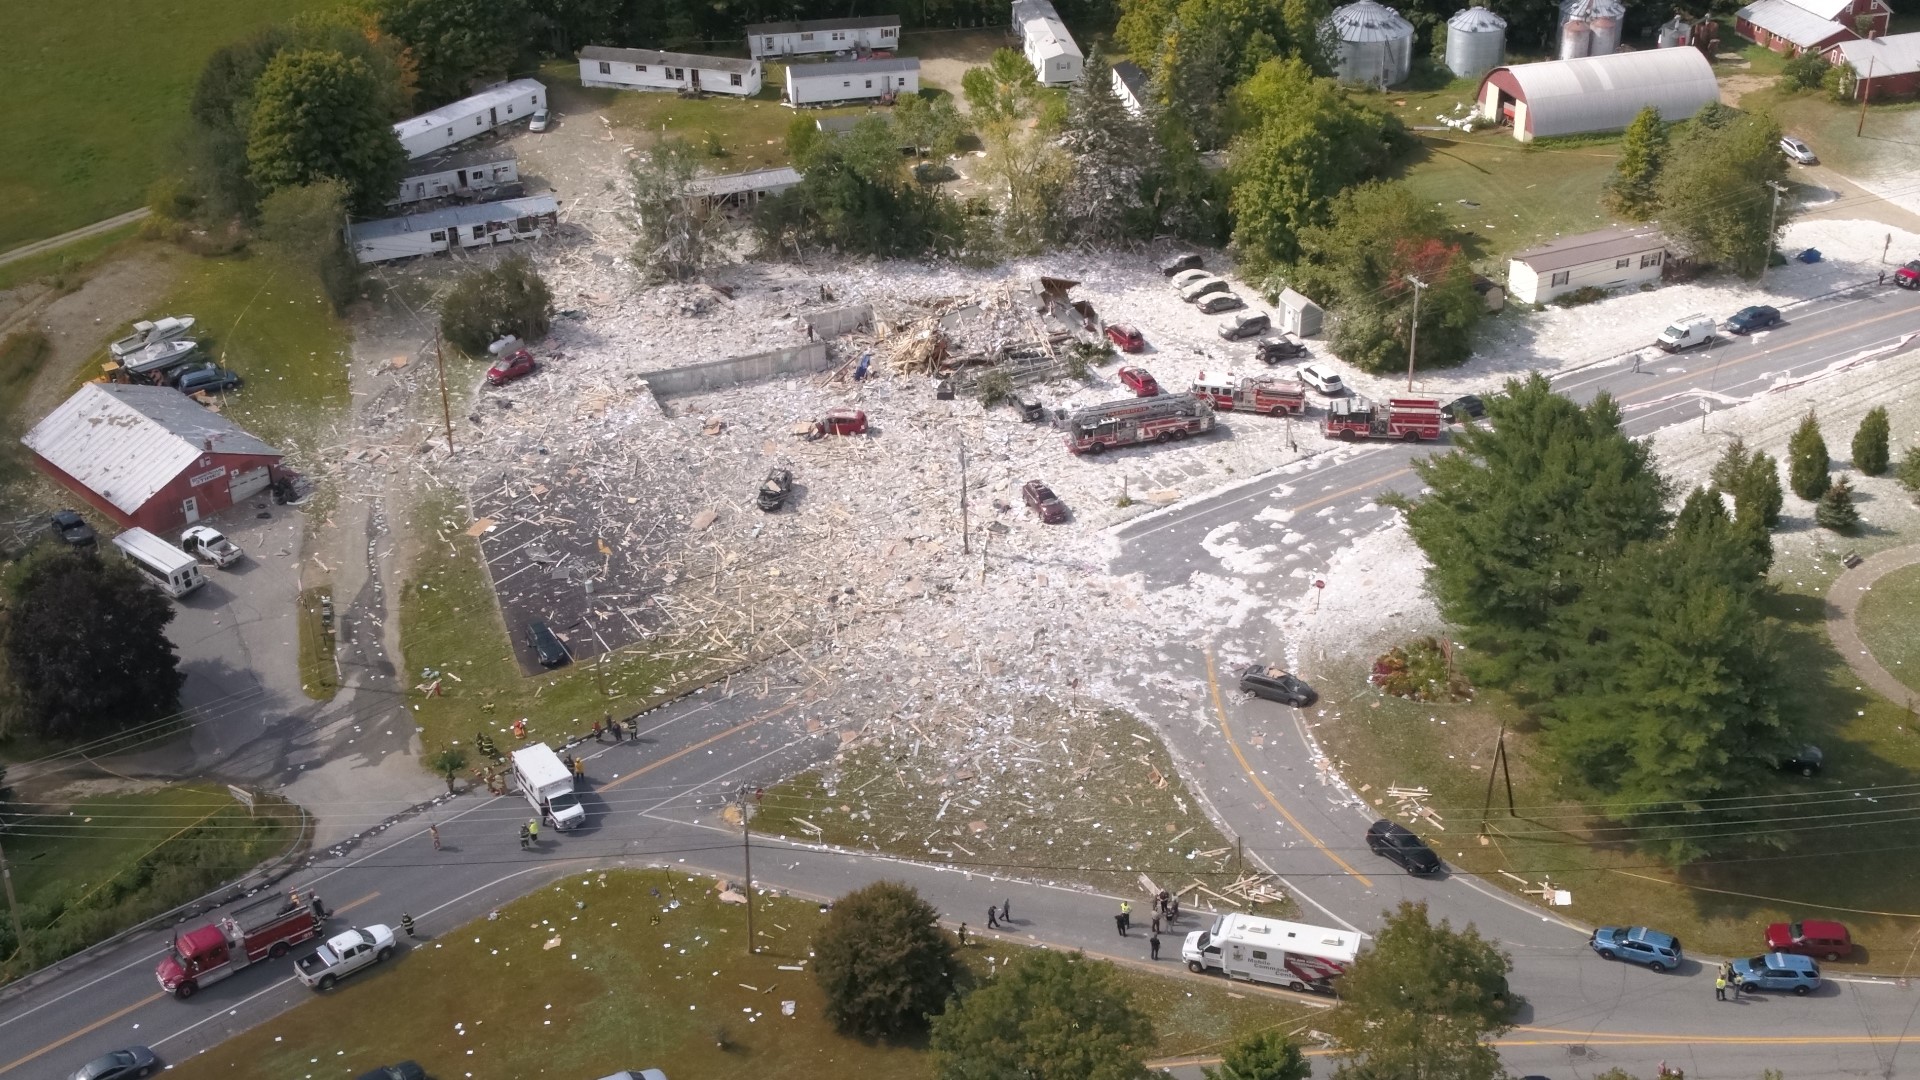 Bird's-eye view of the rubble left in Farmington, Maine, after a building exploded Monday morning, killing one firefighter and injuring several others.